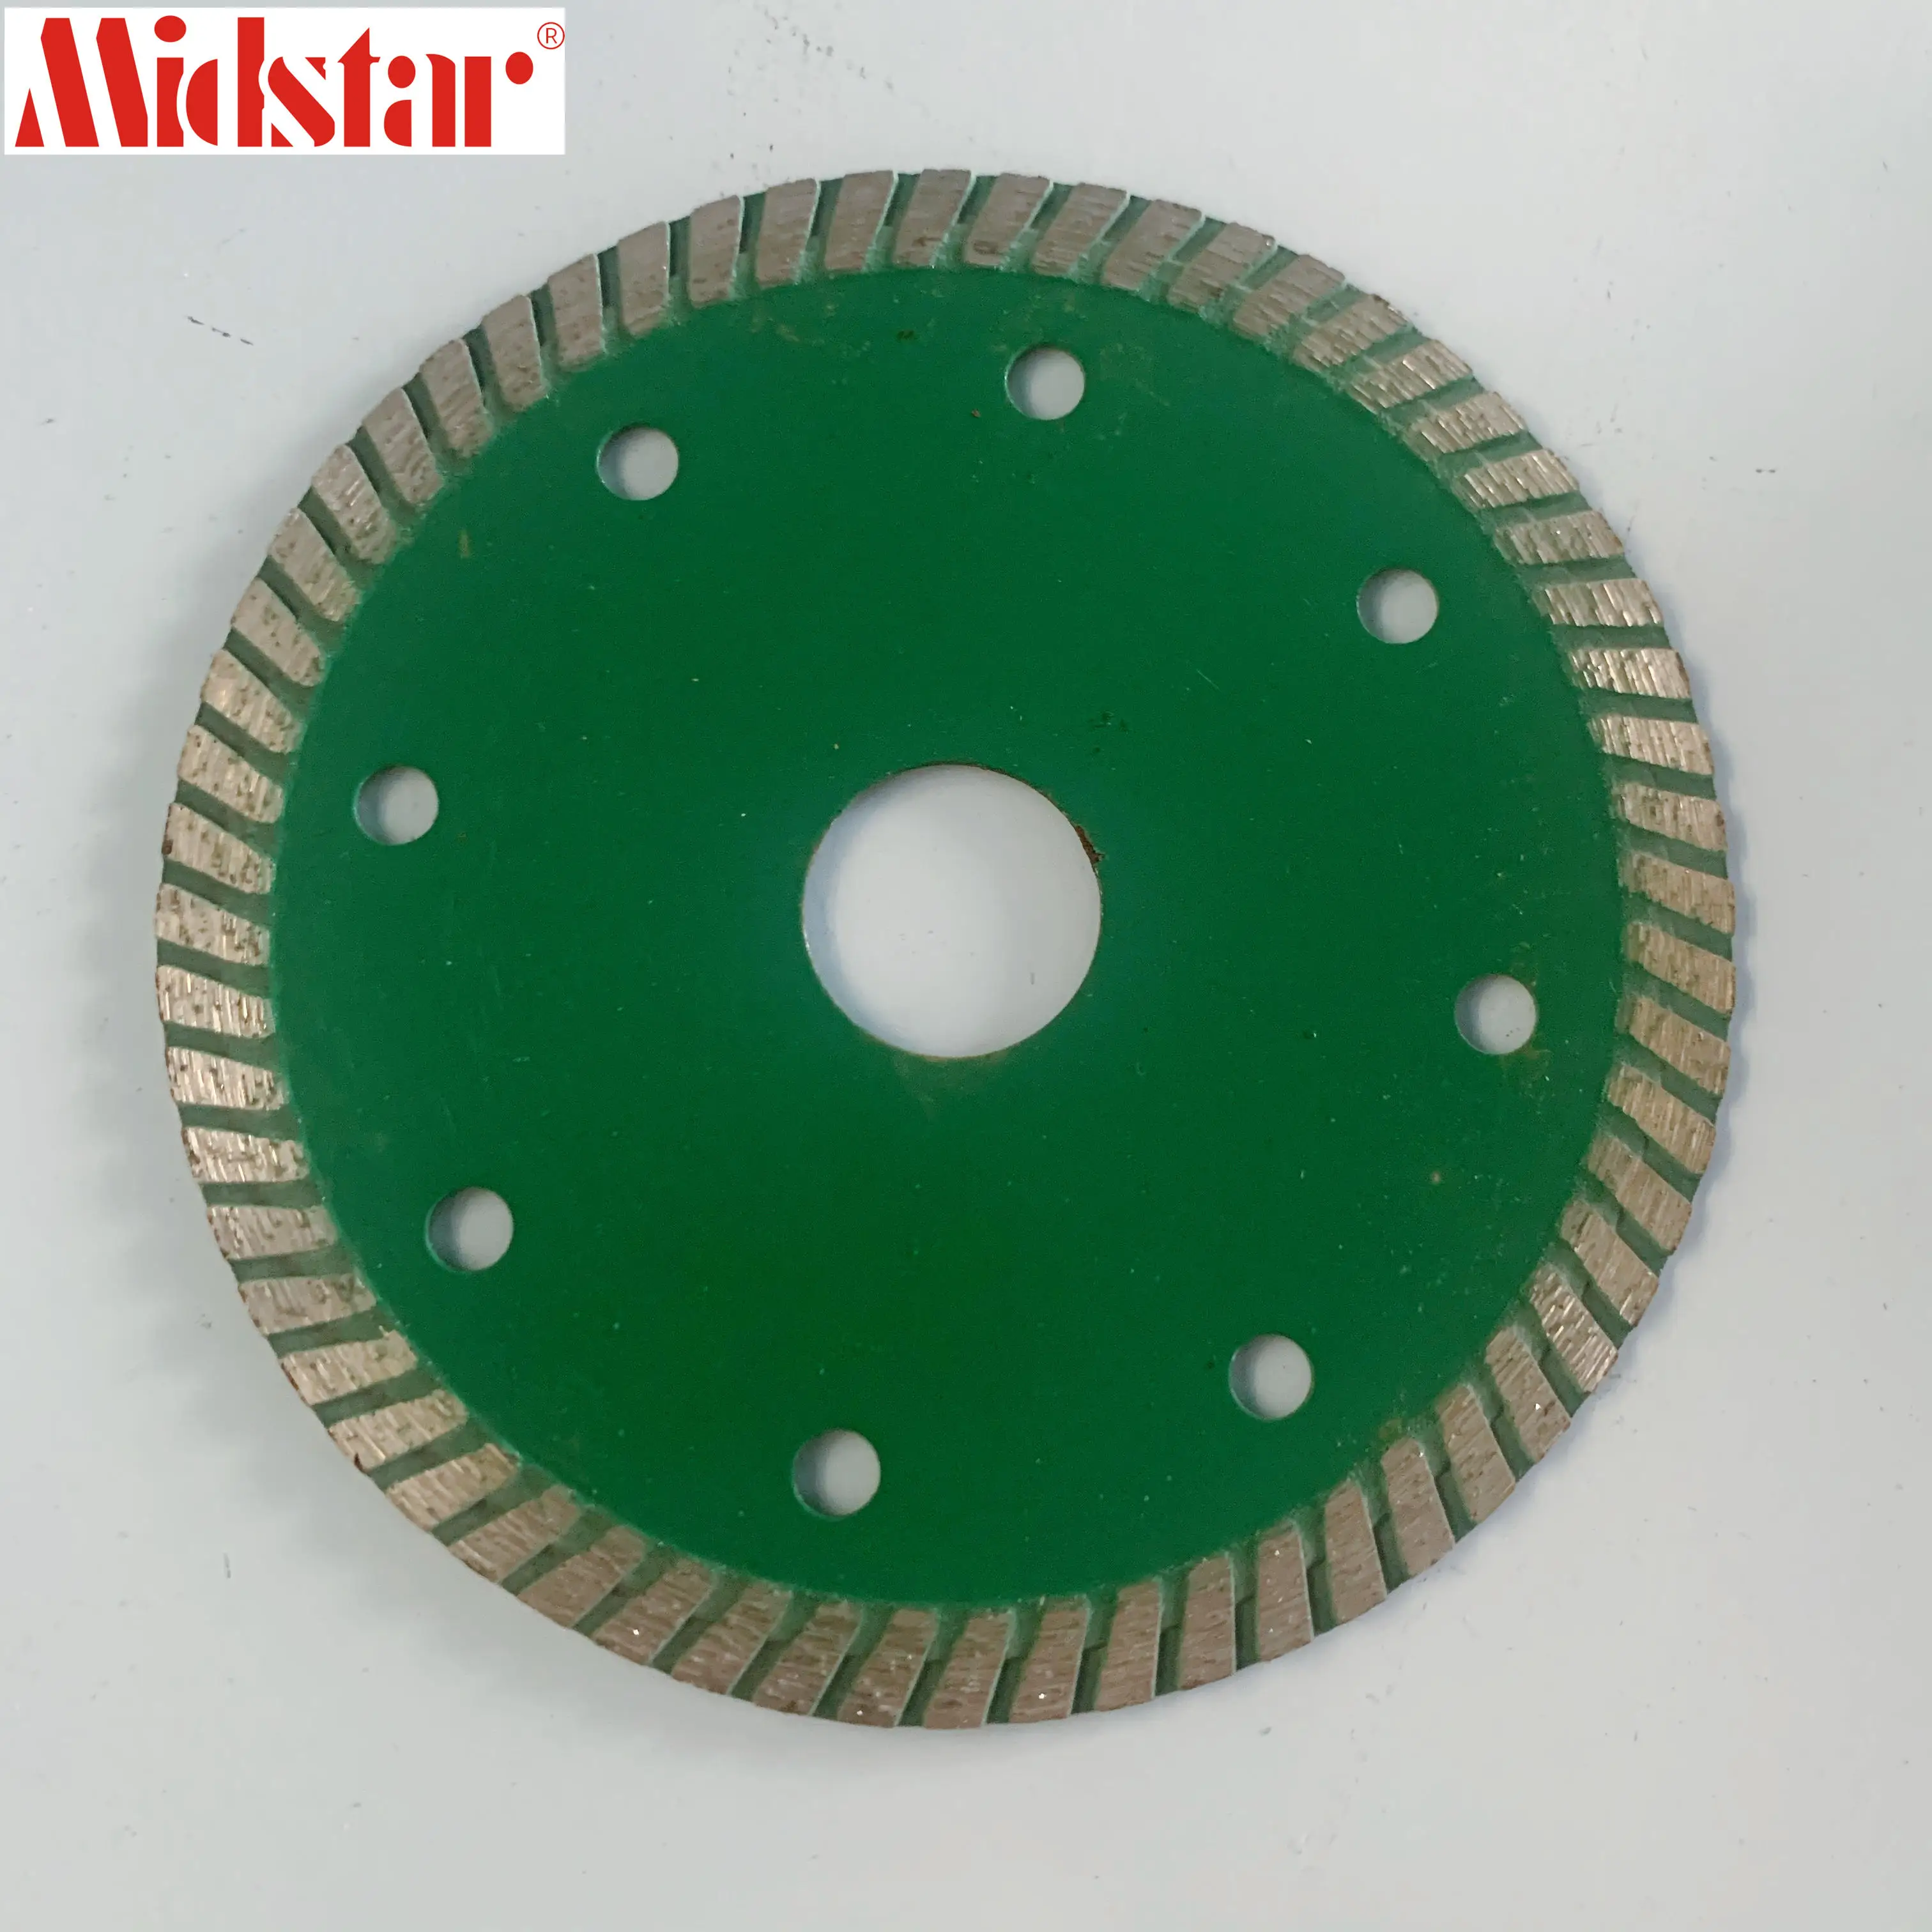 Turbo saw blade  for cutting stone slab,Block,Concrete,Brick,Marble,Granite,Tile,and other materials 4inch